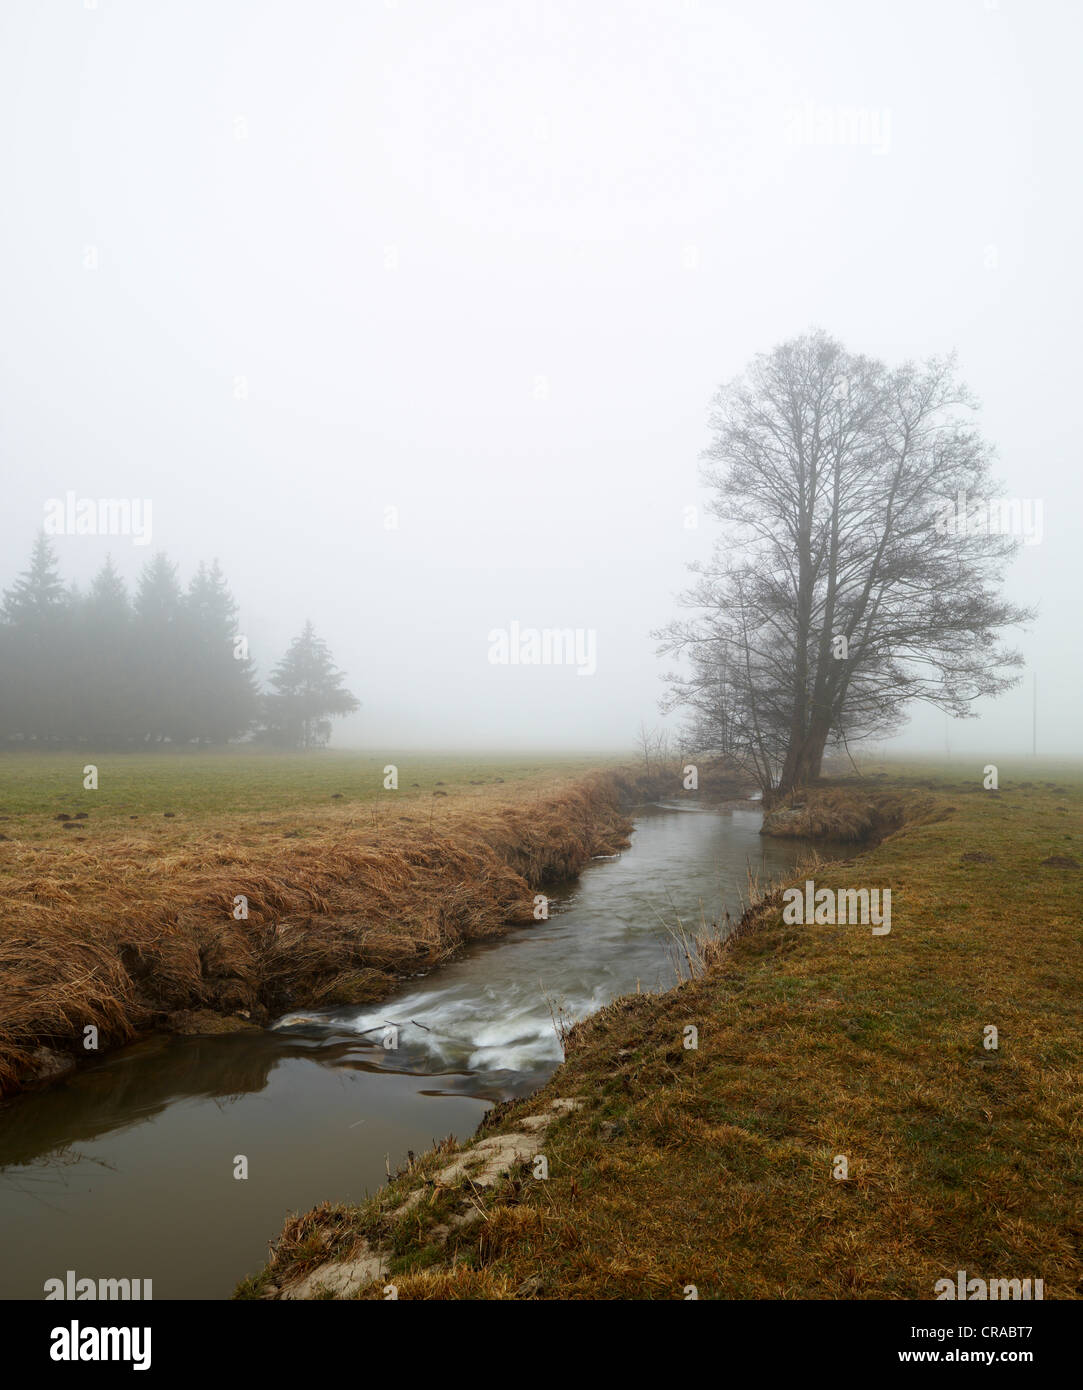 Schmutter River in the fog, Western Woods Nature Park, near Fischach, Bavaria, Germany, Europe Stock Photo